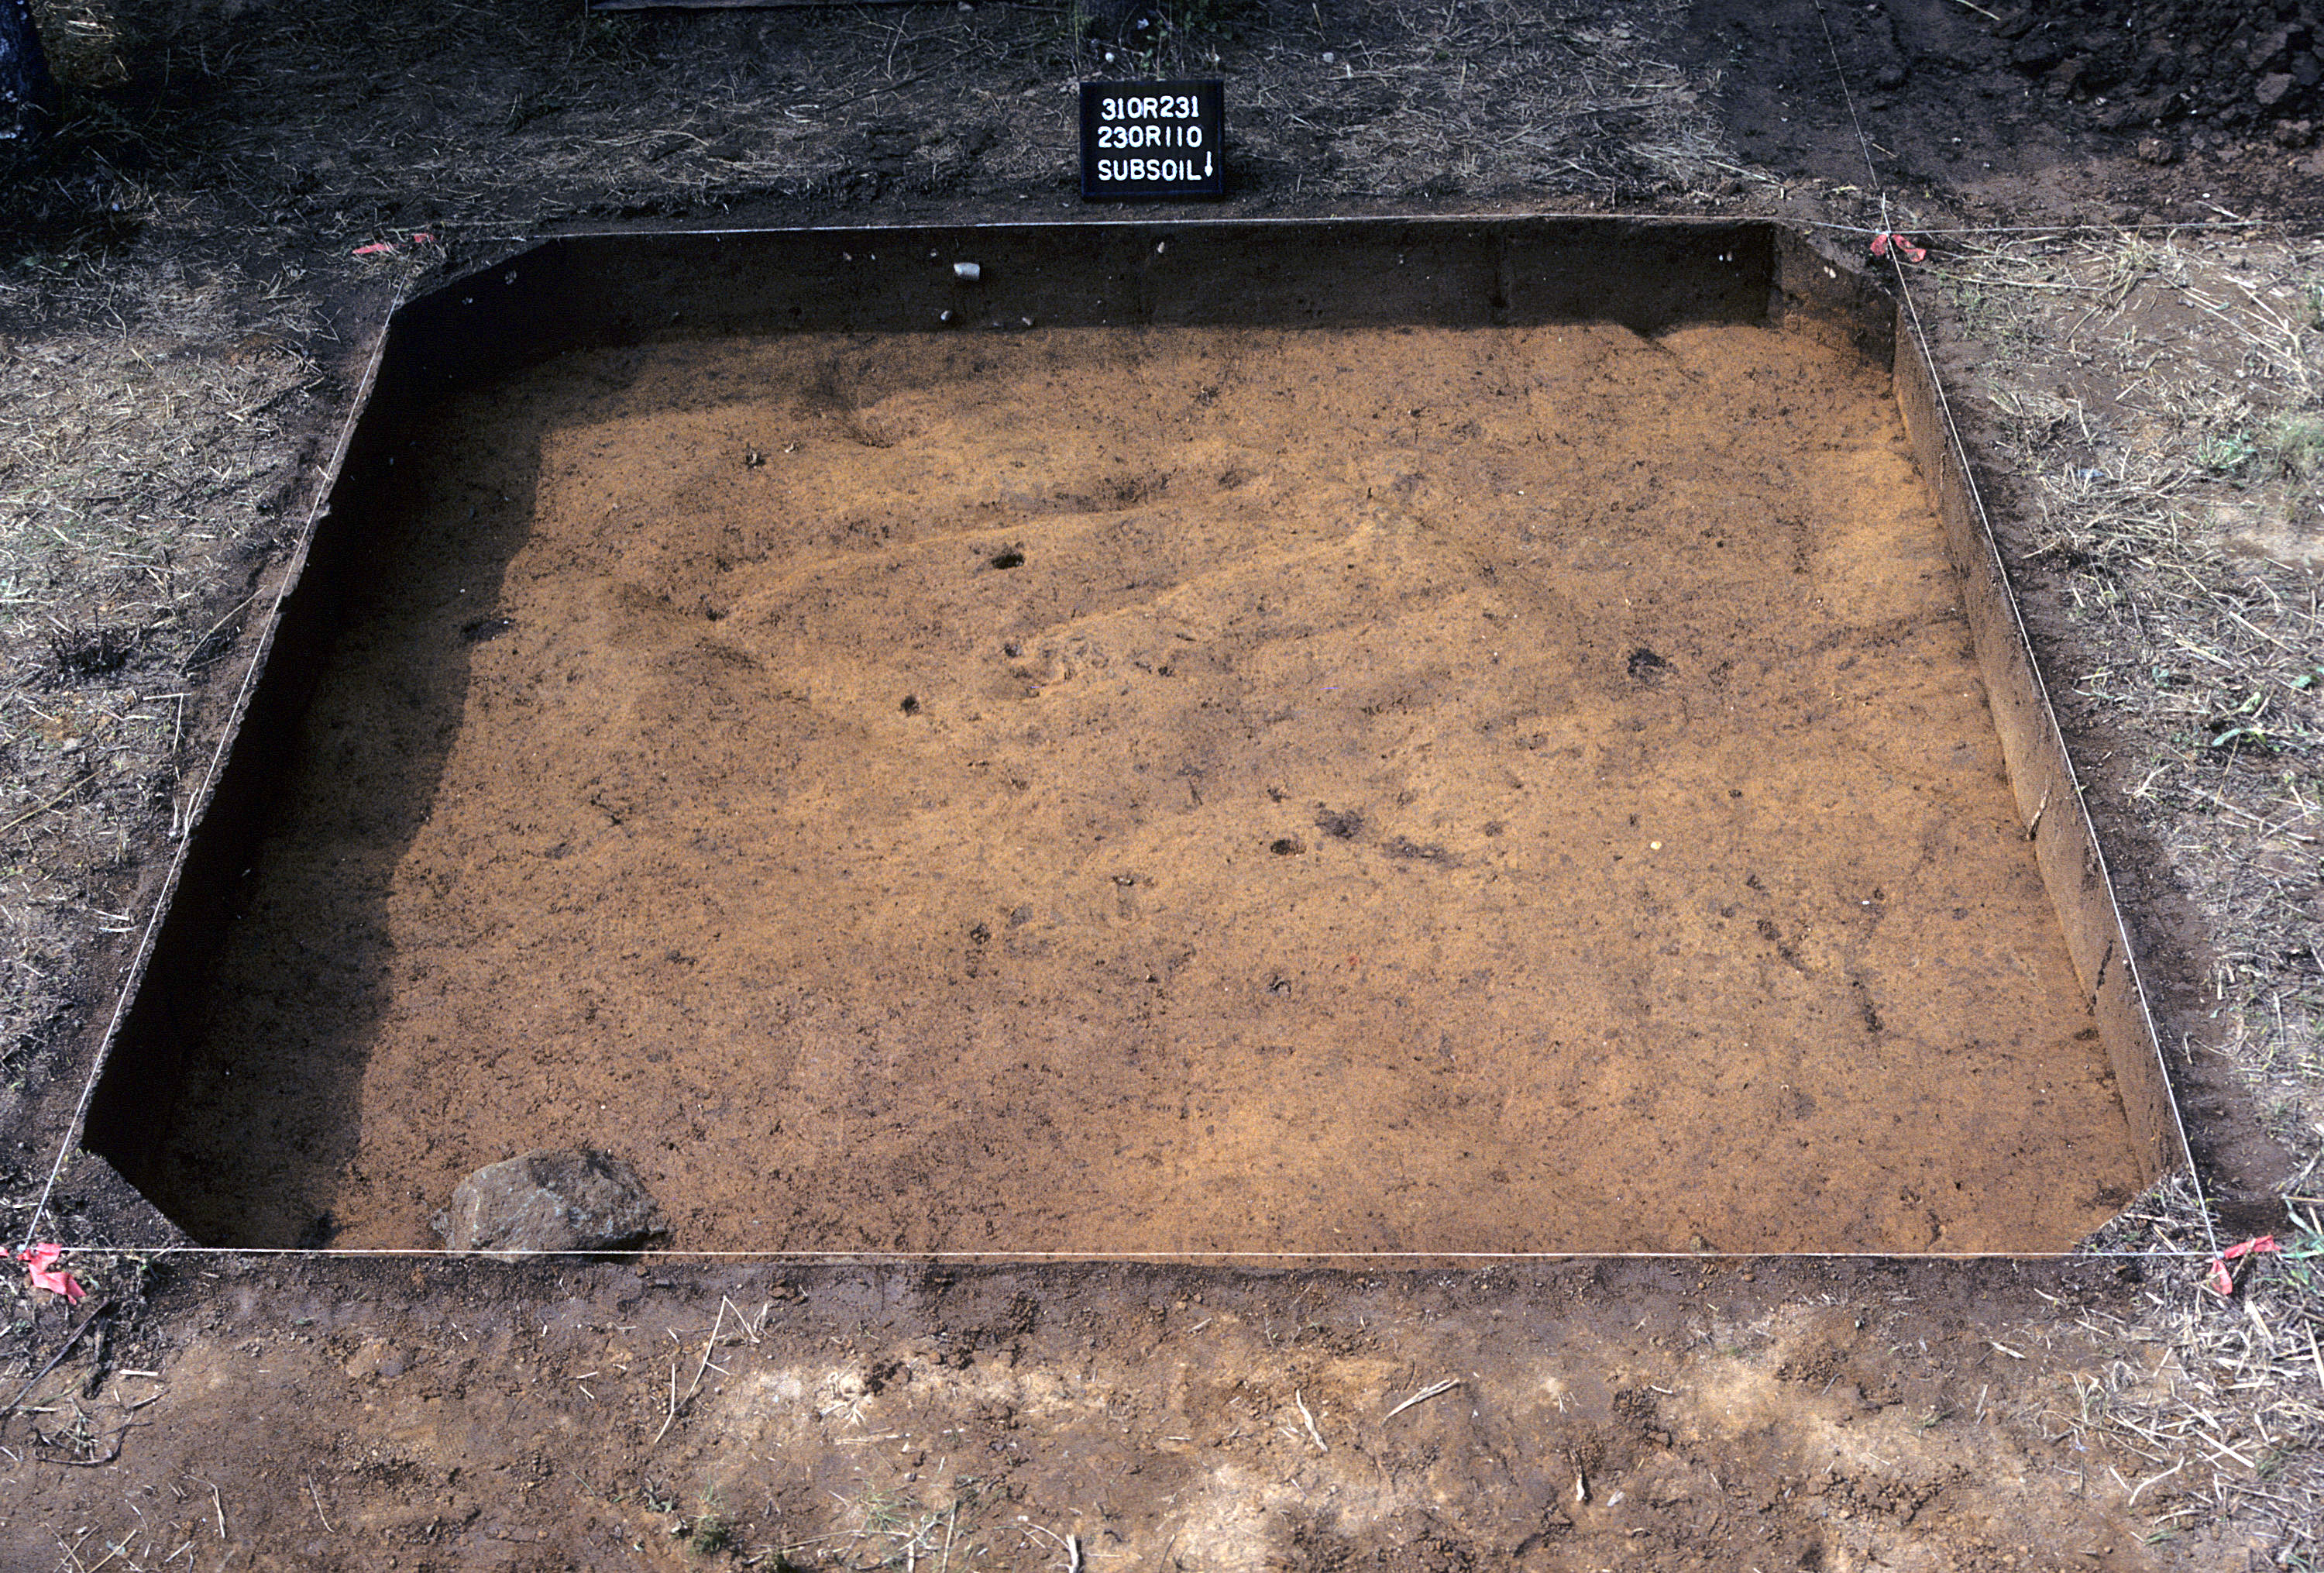 Figure 823. Sq. 230R110 at top of subsoil (view to south).